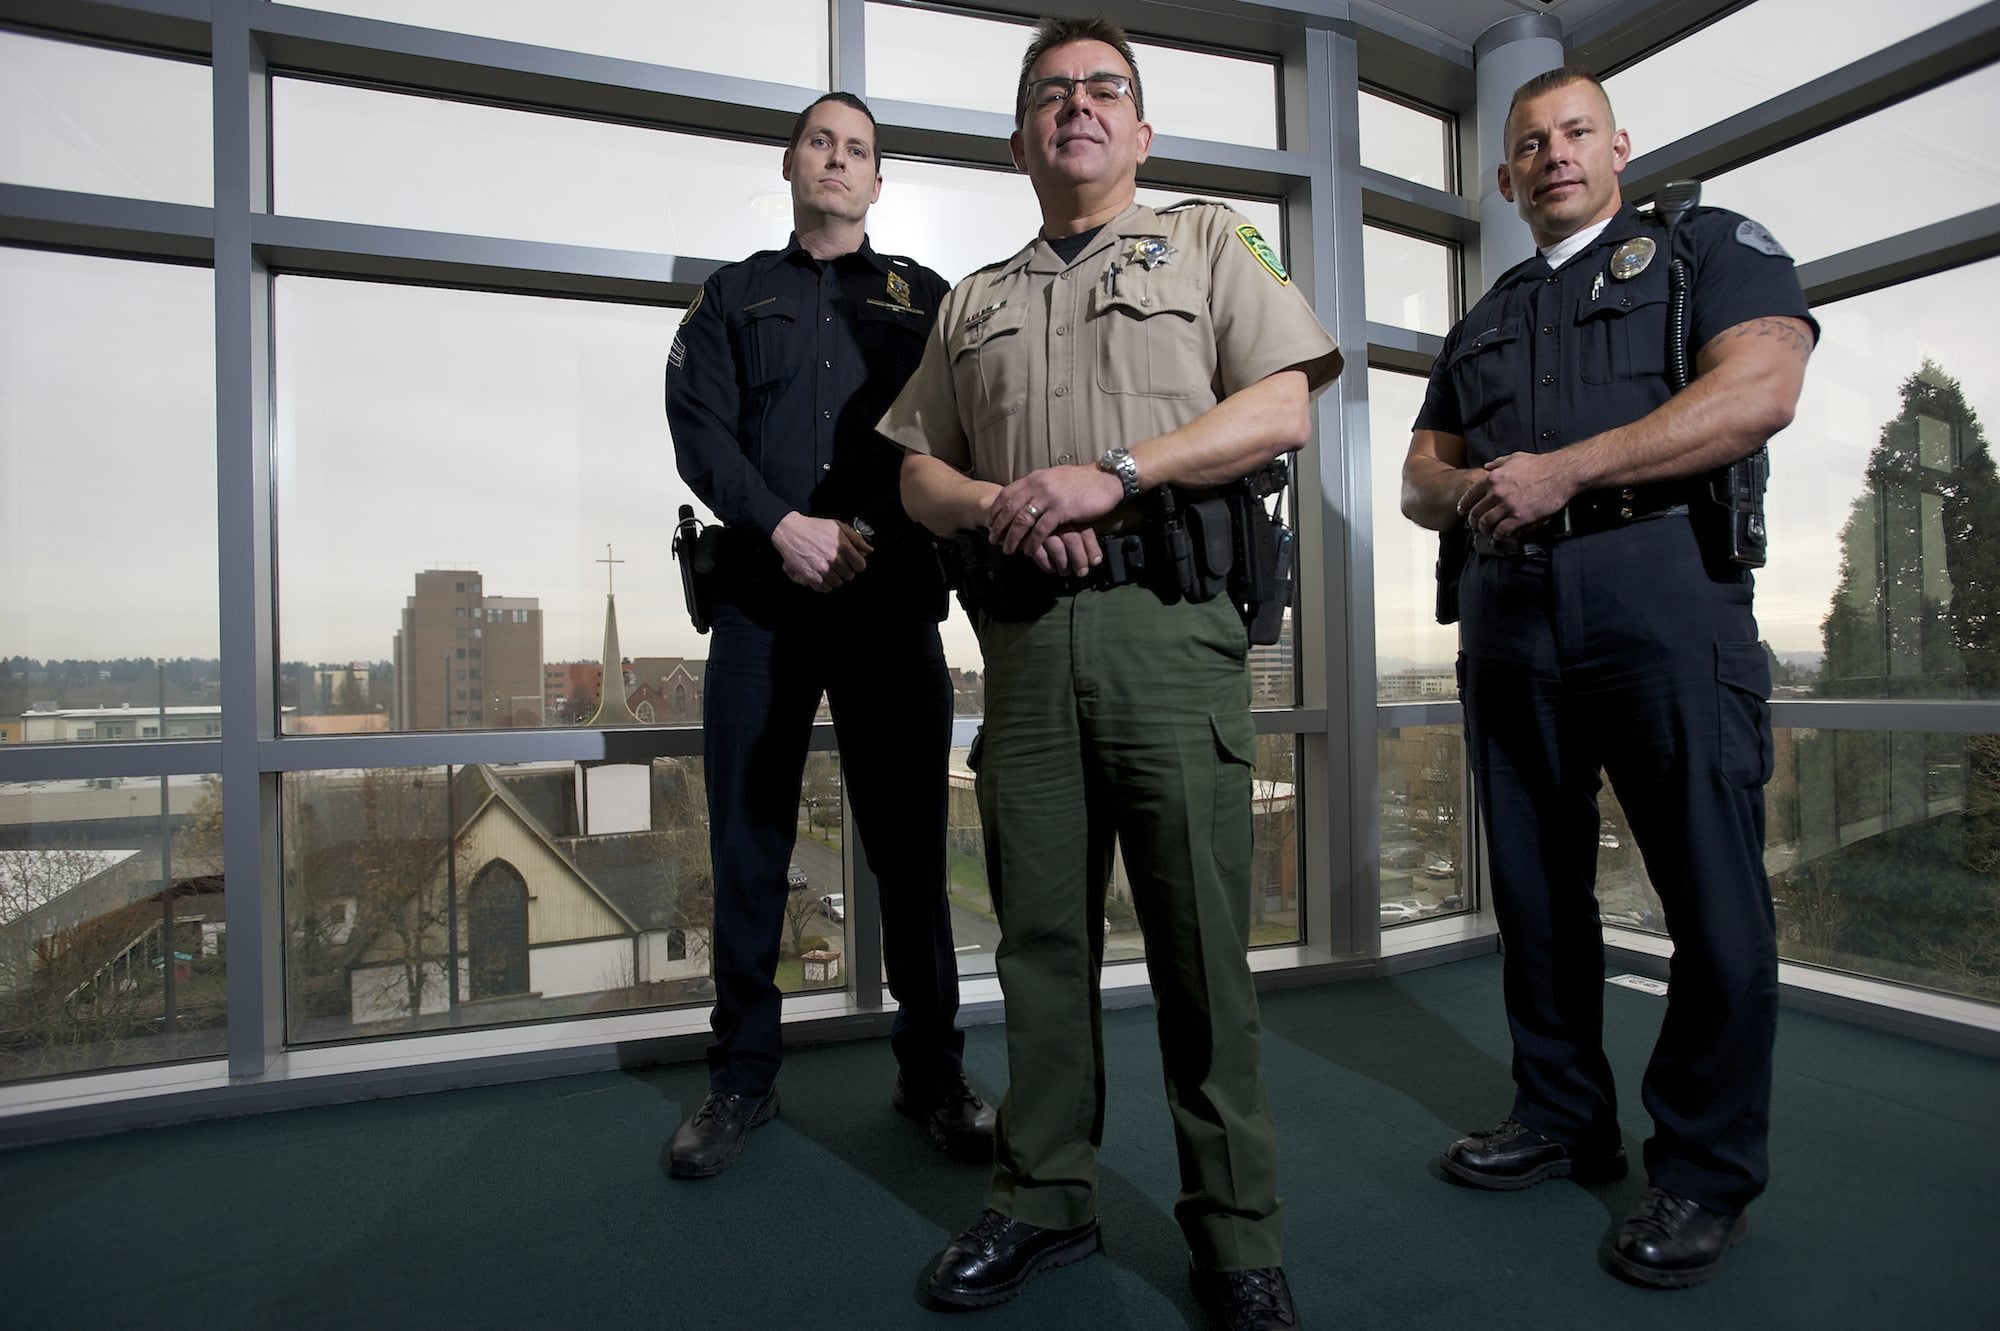 Portland Police Sgt. Peter Simpson, from left, Clark County Sheriff's Deputy Tim Hockett and Vancouver police Officer Taylor Smarr pose for a portrait inside the Clark County Public Service Center in February 2013. The Vancouver Police Department, Clark County Sheriff's Office and Portland Police Bureau had just announced plans to use one central records management system that would allow officers to easily access information from other agencies. The sheriff's office is now saying the system isn't worth the hassle.